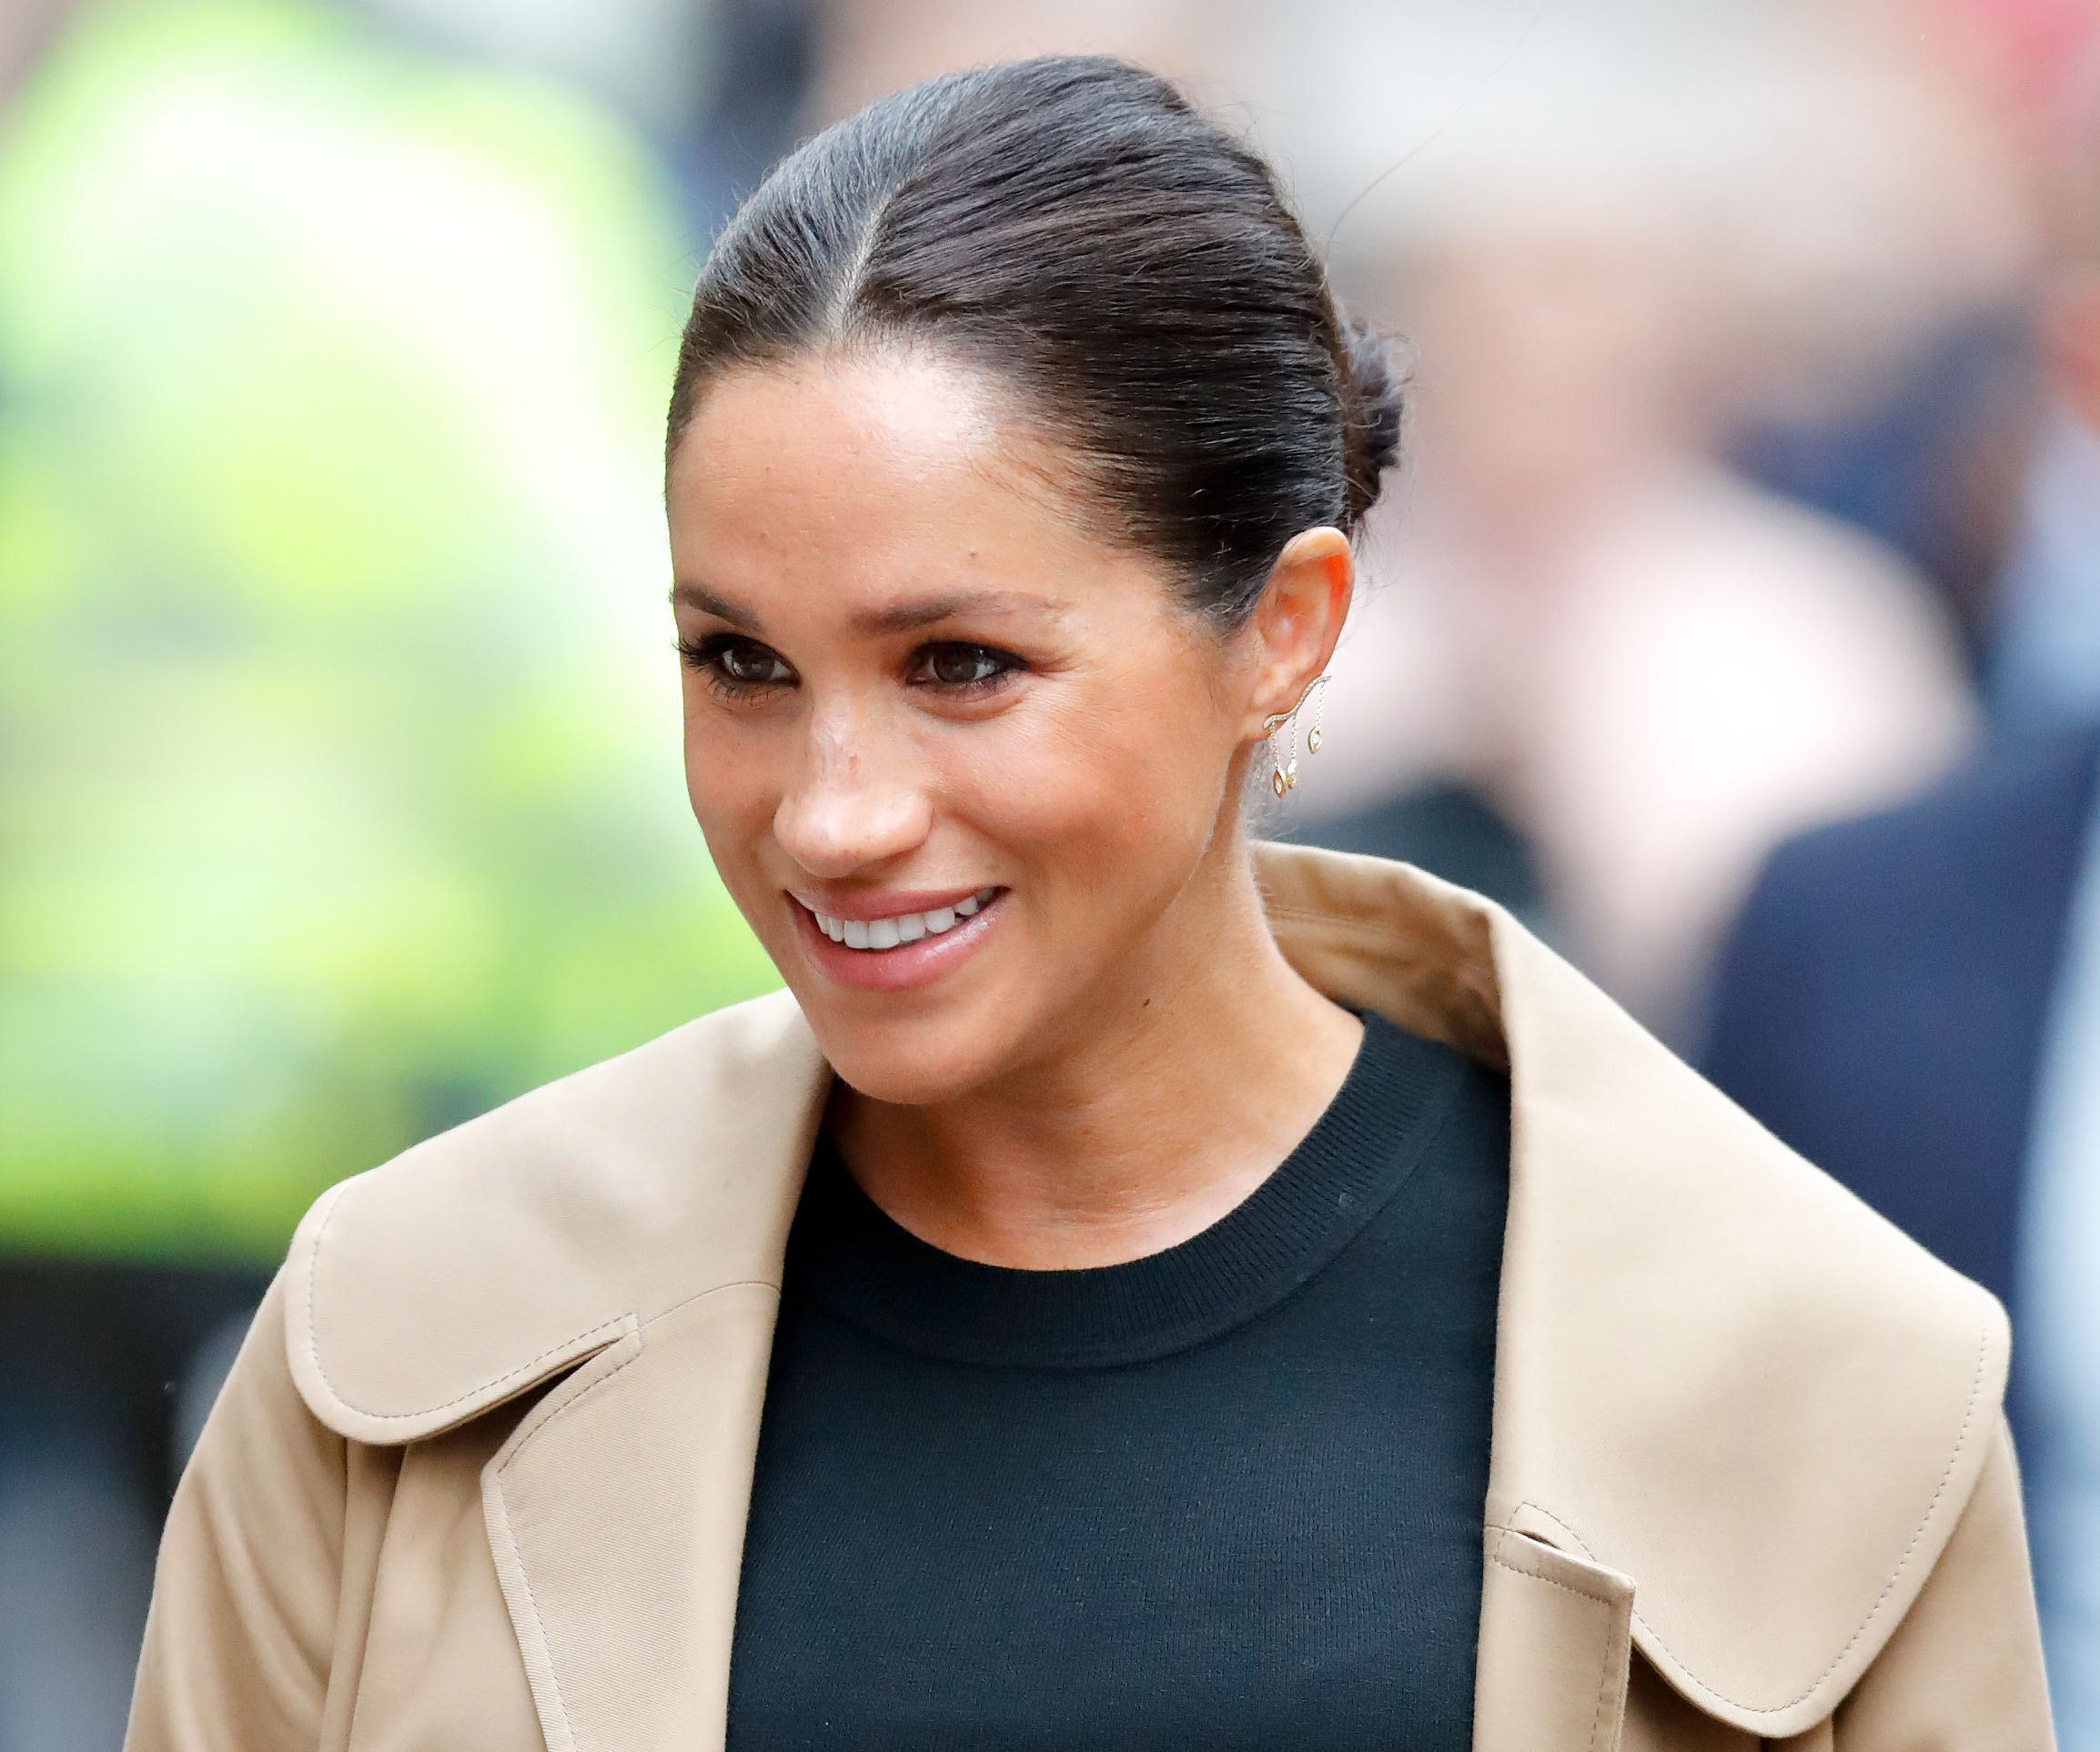 Duchess Meghan stuns in a chic maternity outfit as her royal patronages are announced